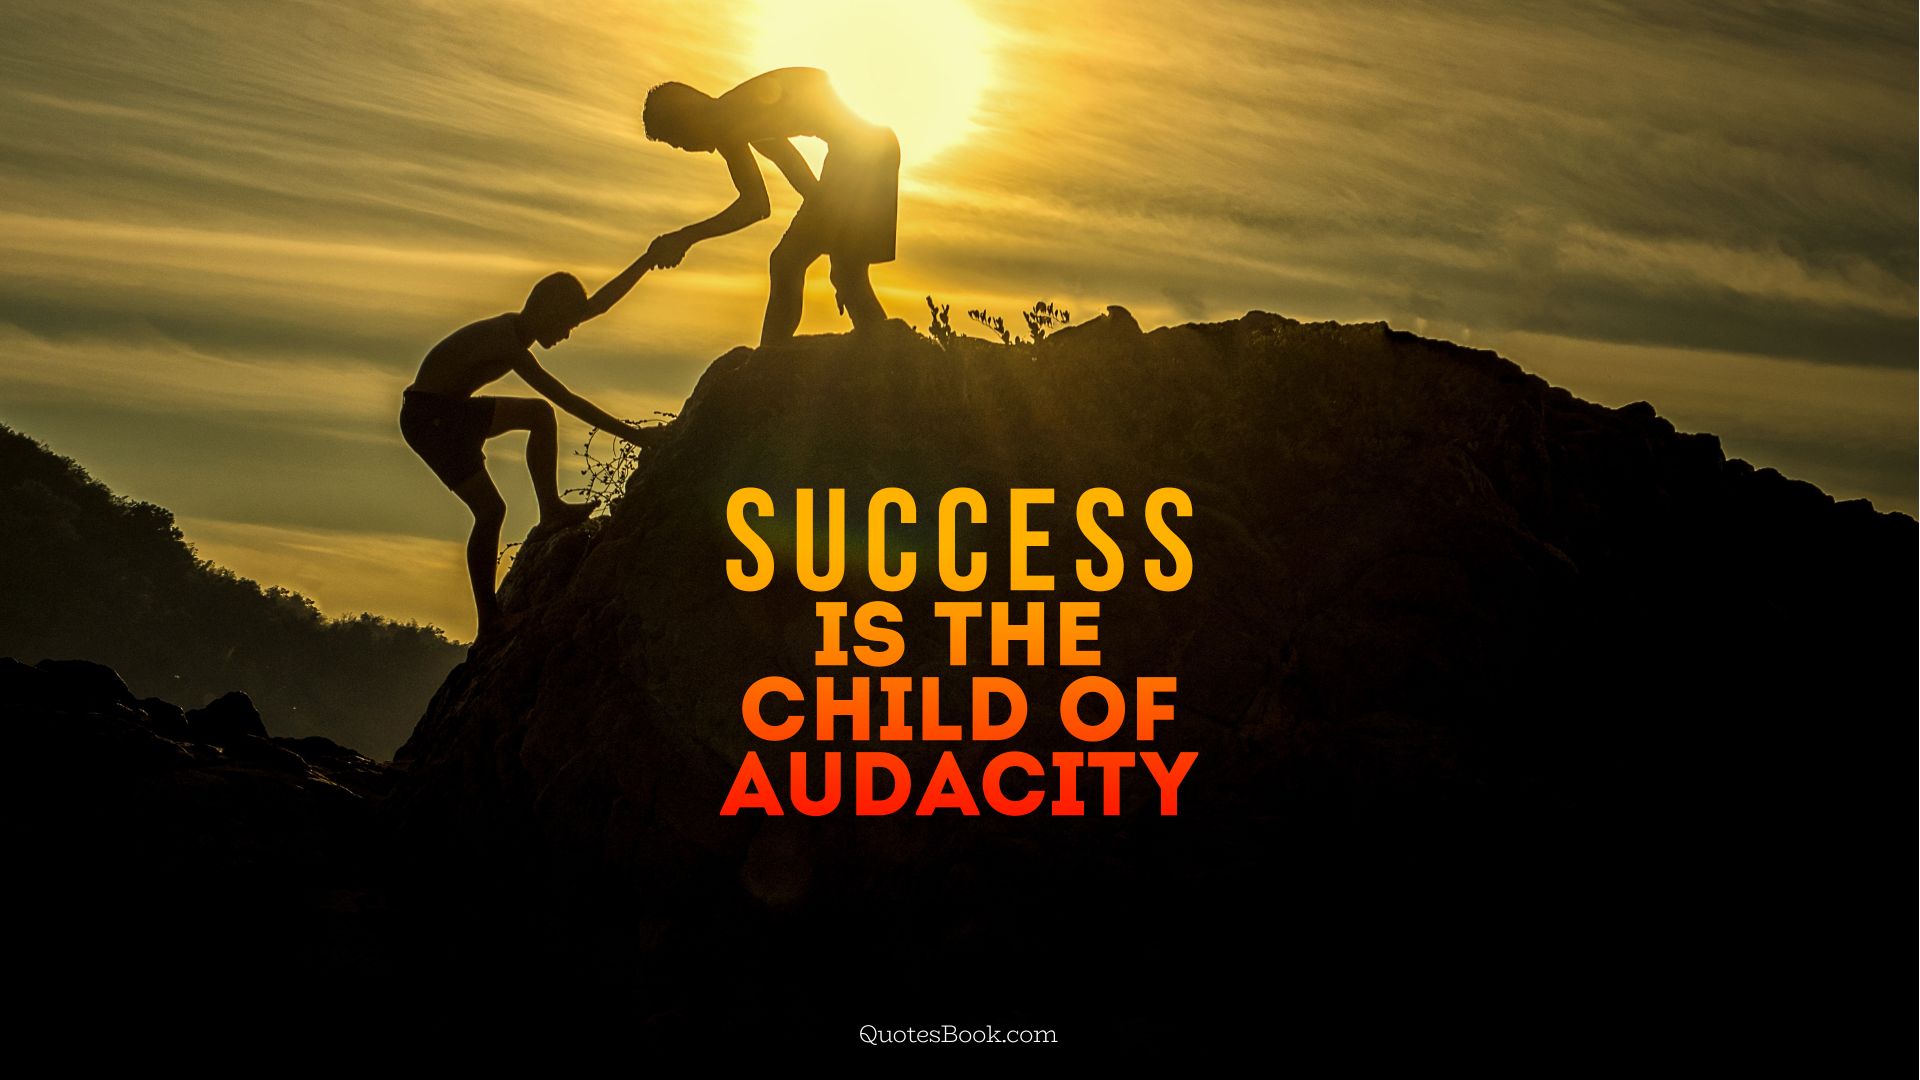 Success is the child of audacity